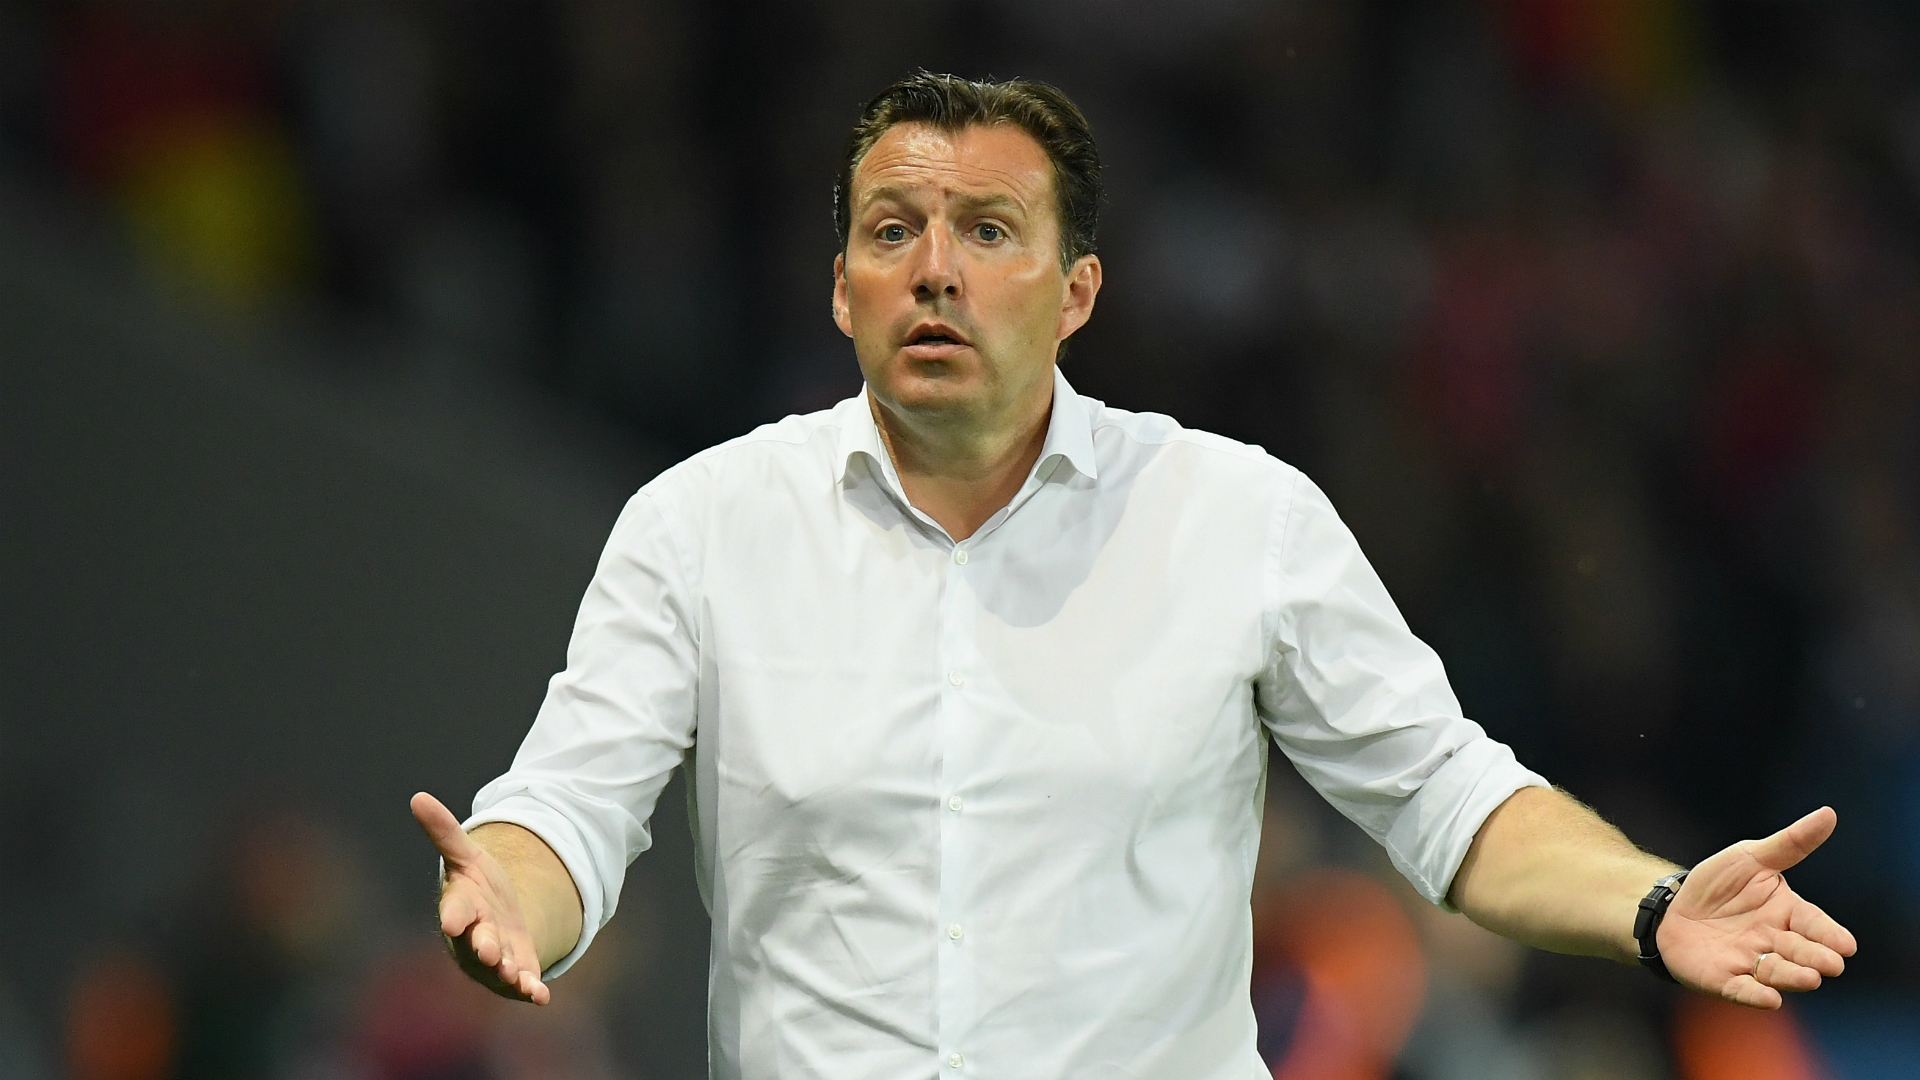 Belgium Fire Marc Wilmots After Disappointing Euro 2016